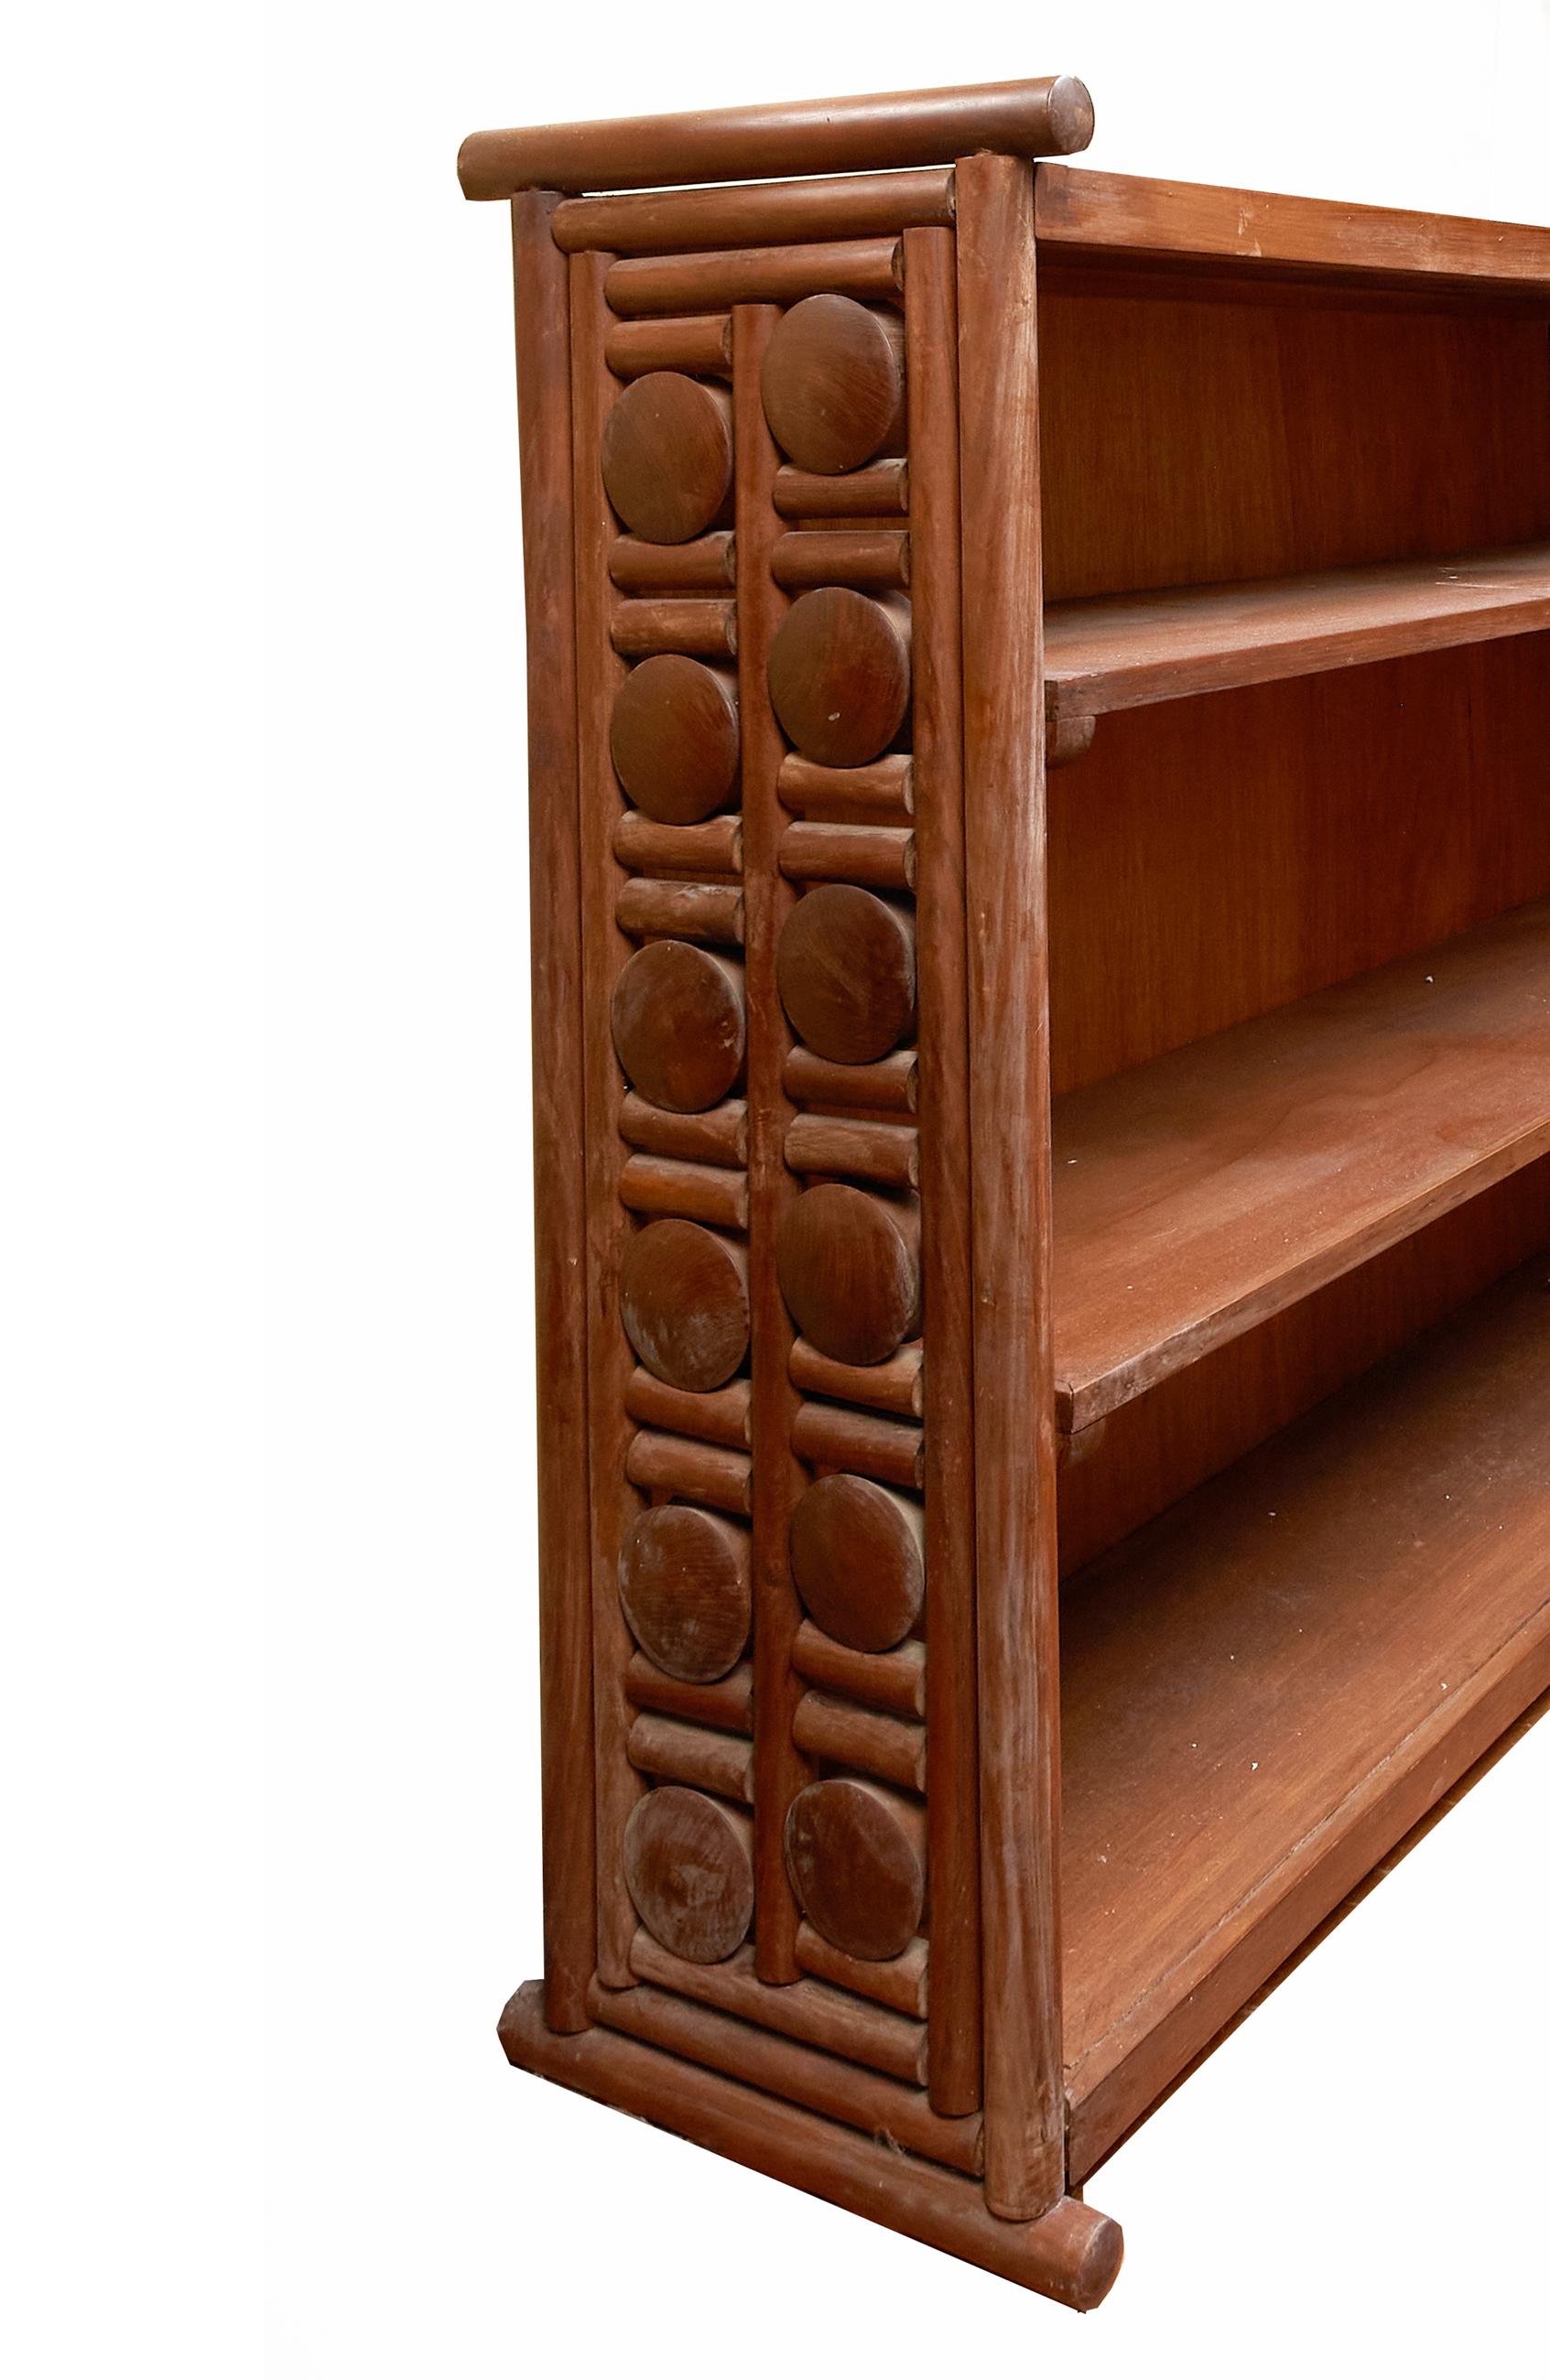 Rare and unique handcrafted solid teak Mid-Century Modern bookcase with floating disk design. The intricately designed sides are a series of teak disks and bars which allows the disks to turn freely while being held in place without nails. This